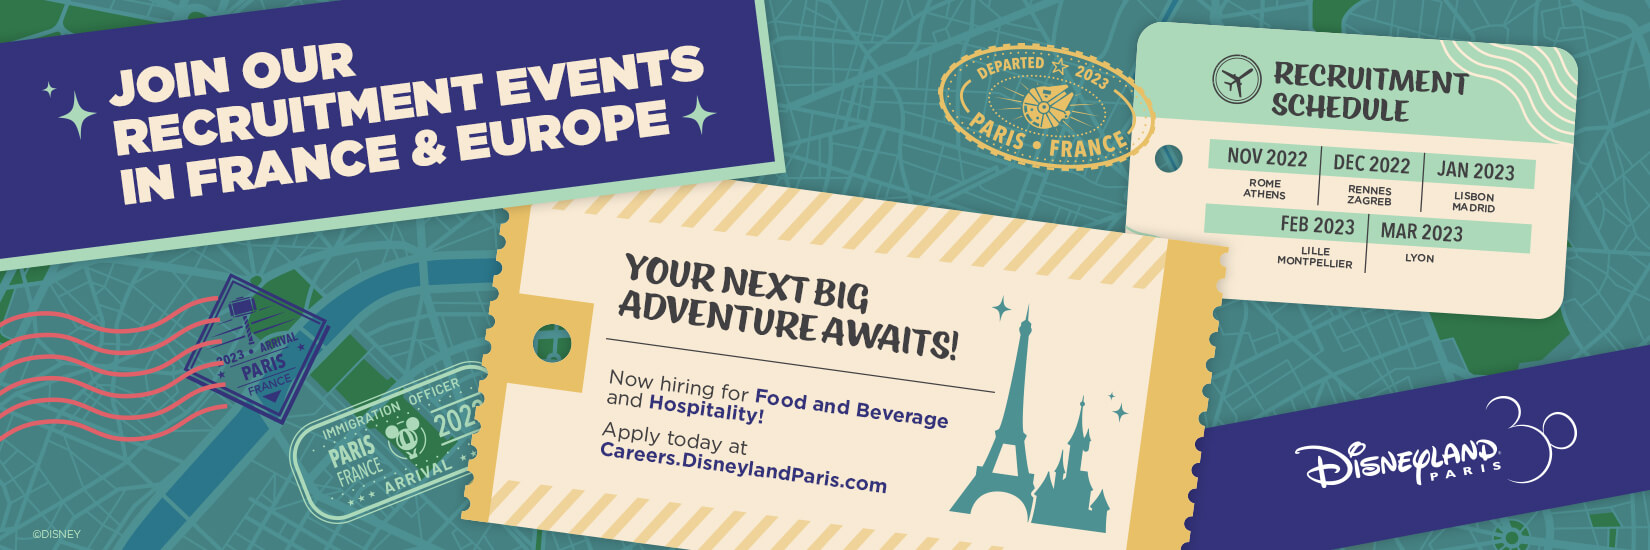 JOIN OUR RECRUITMENT EVENTS IN FRANCE & EUROPE. YOUR NEXT BIG ADVENTURE AWAITS! Now hiring for Food and Beverage and Hospitality! Apply today at Careers.DisneylandParis.com  RECRUITMENT SCHEDULE: NOV 2022 - ROME, ATHENS. DEC 2022 - RENNES, ZAGREB. JAN 2023 - LISBON, MADRID. FEB 2023 - LILLE, MONTPELLIER. MAR 2023 - LYON